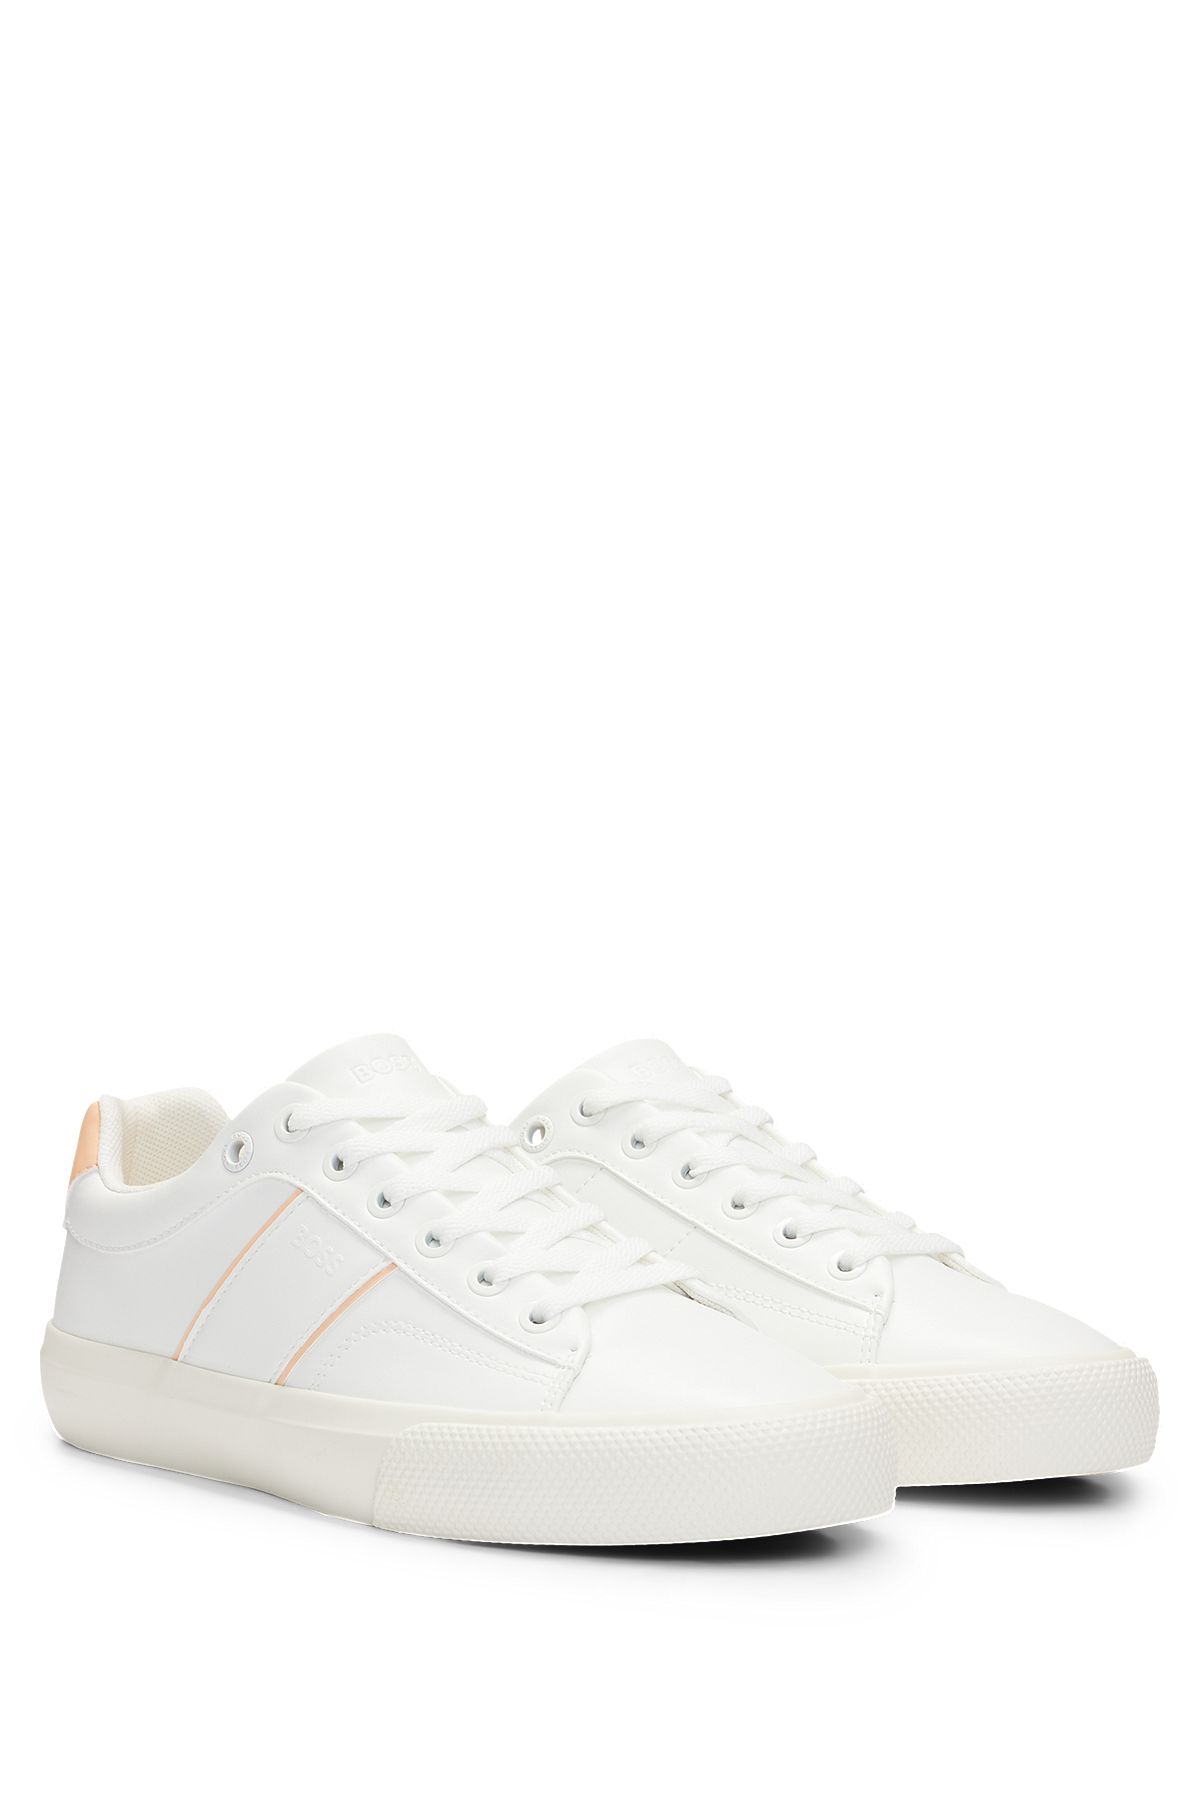 Low-top trainers with contrast accents and rubber outsole, White